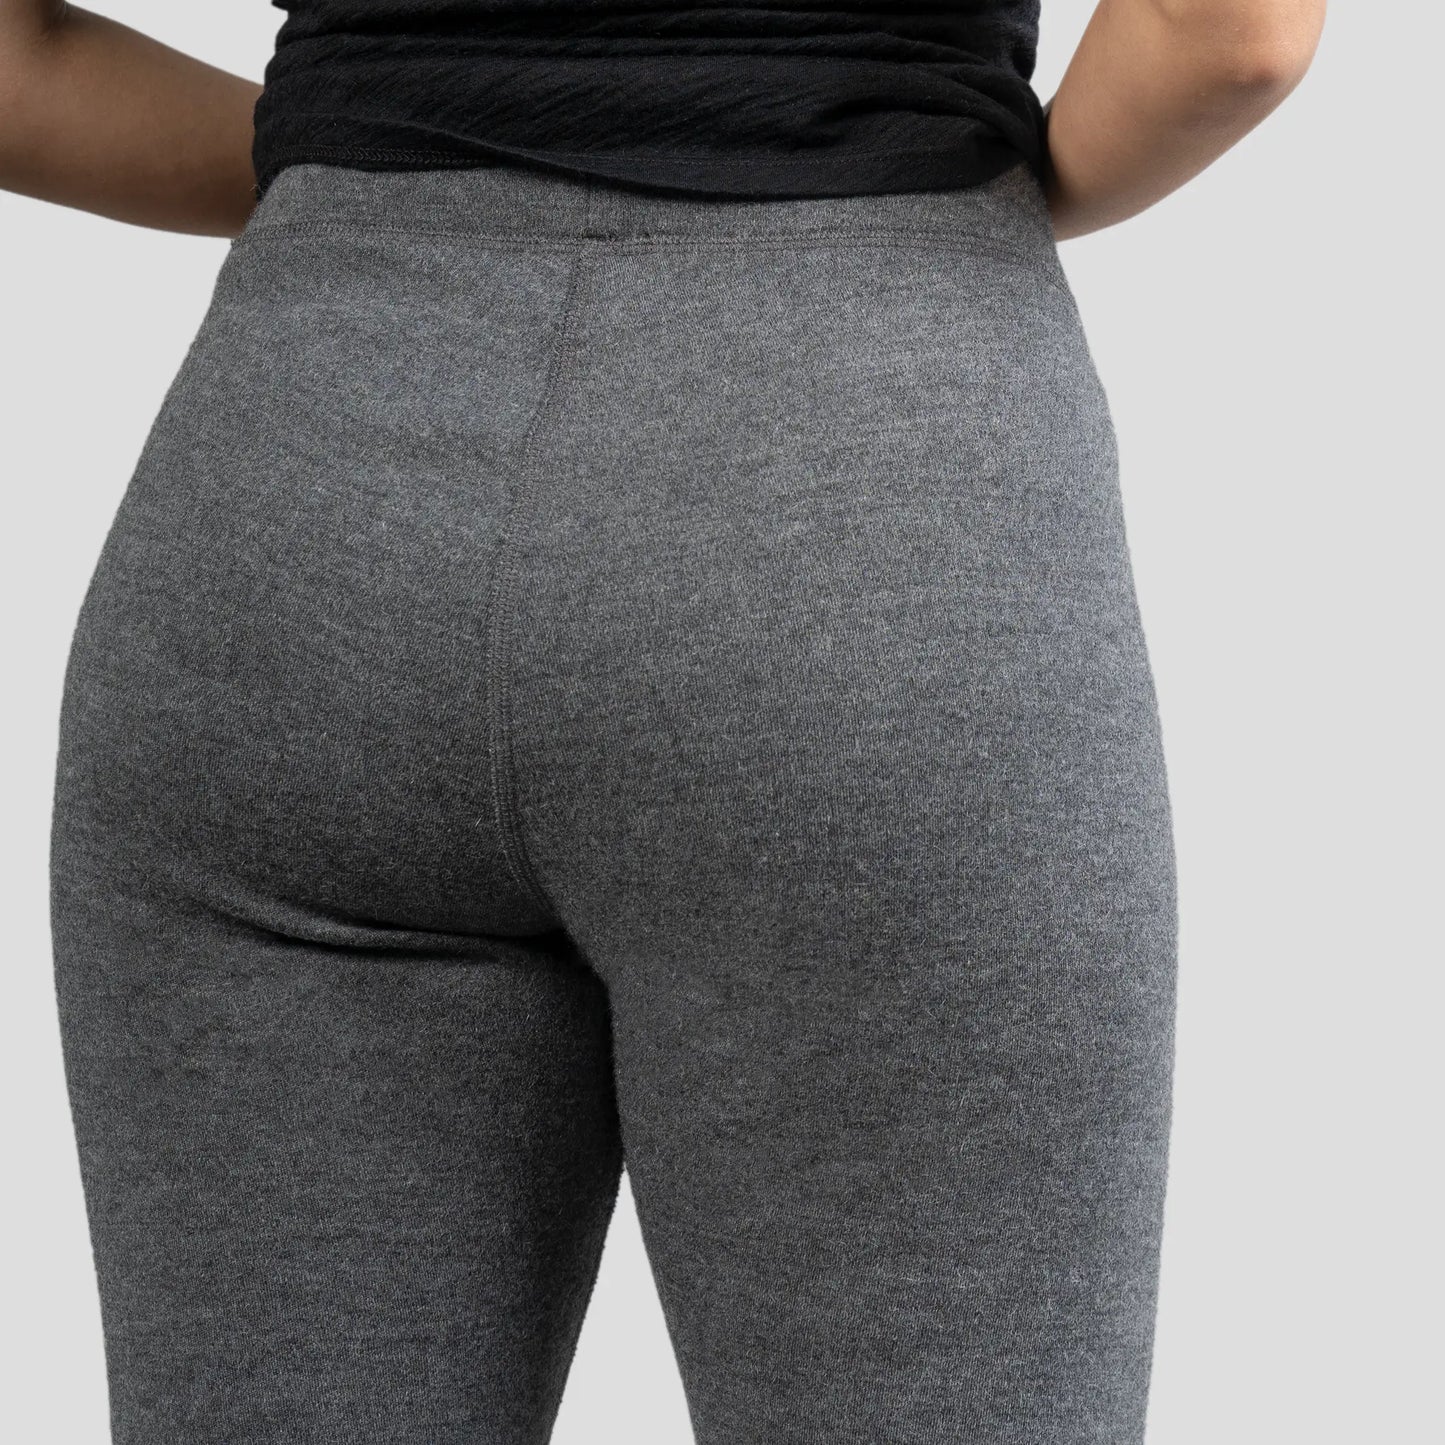 womens ultimate outdoor leggings midweight color gray